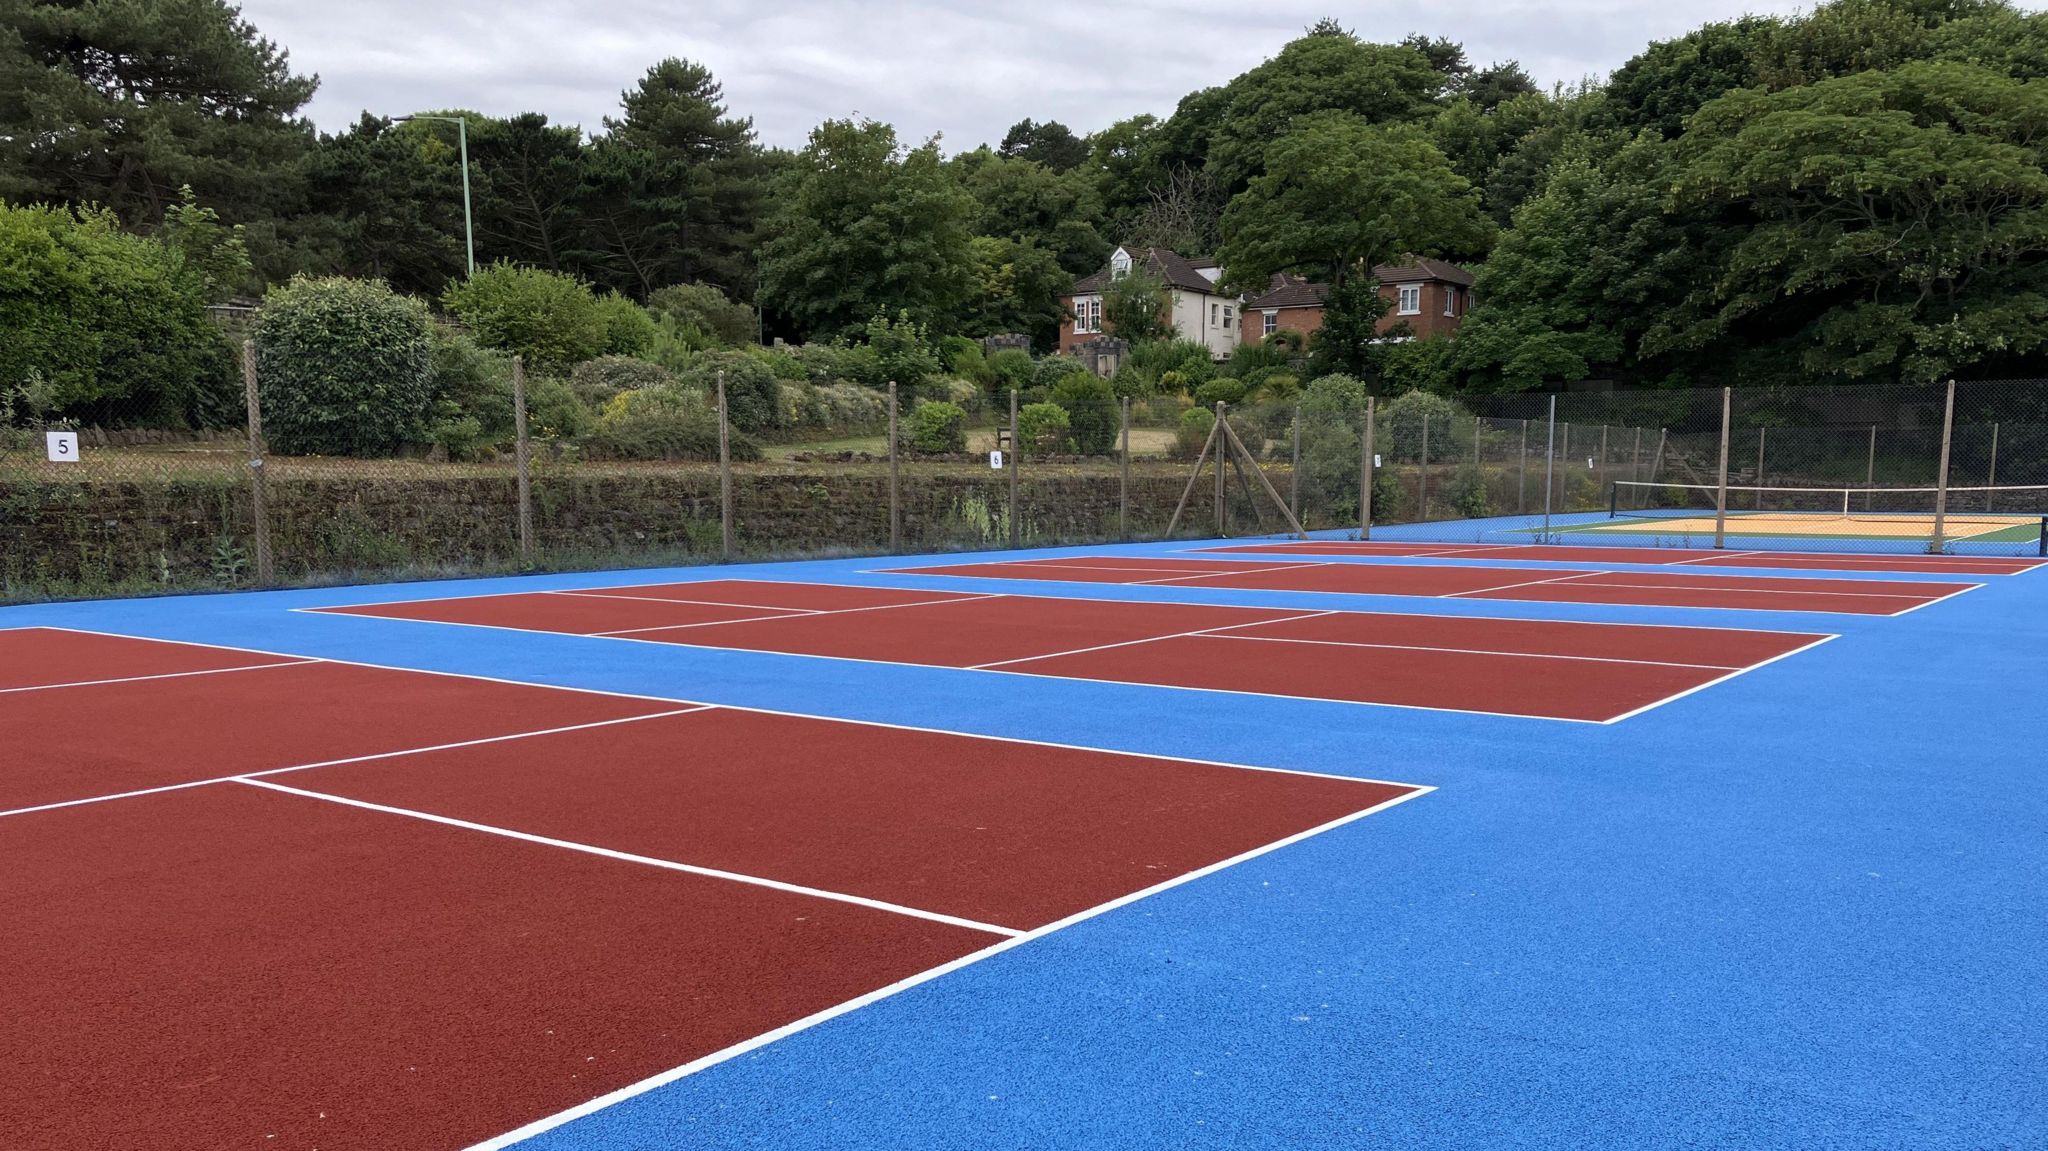 Red pickleball courts on a blue foundation surrounded by trees 